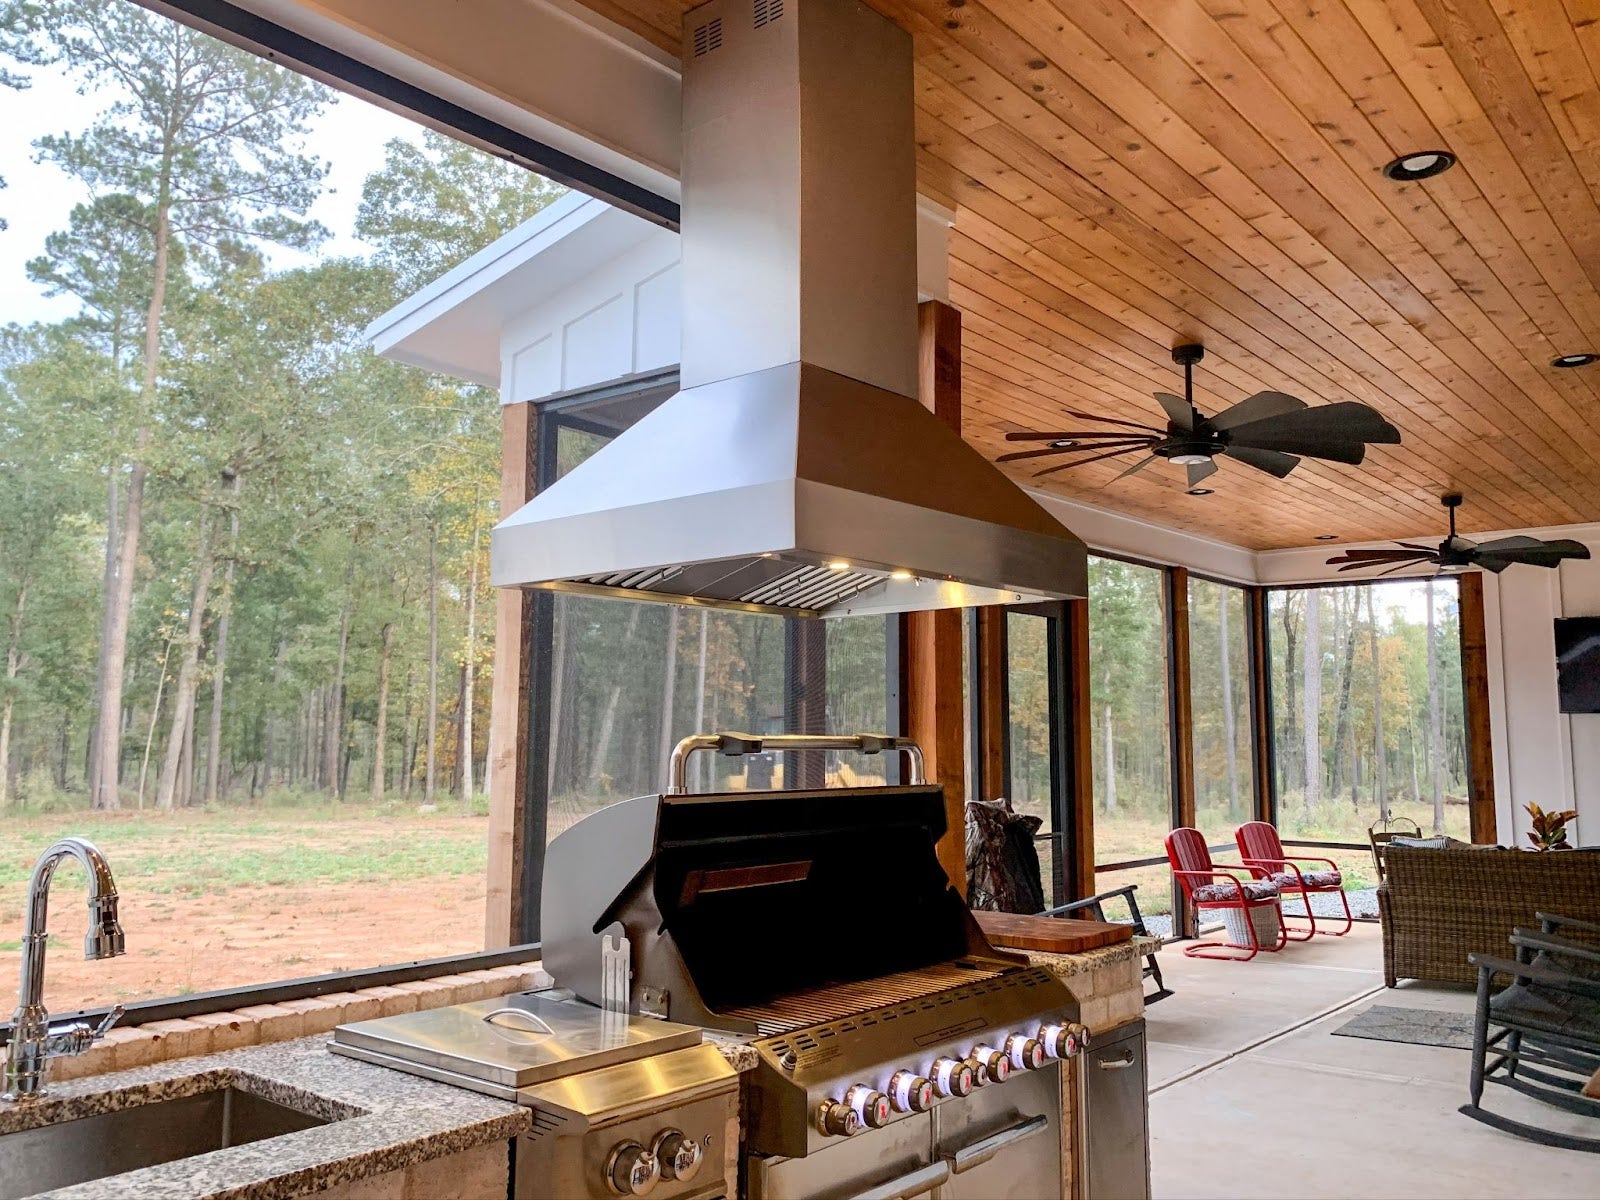 Tranquil outdoor entertainment area featuring a high-end grill, wood ceiling, and panoramic views of a pine forest. - Proline Range Hoods - prolinerangehoods.com 